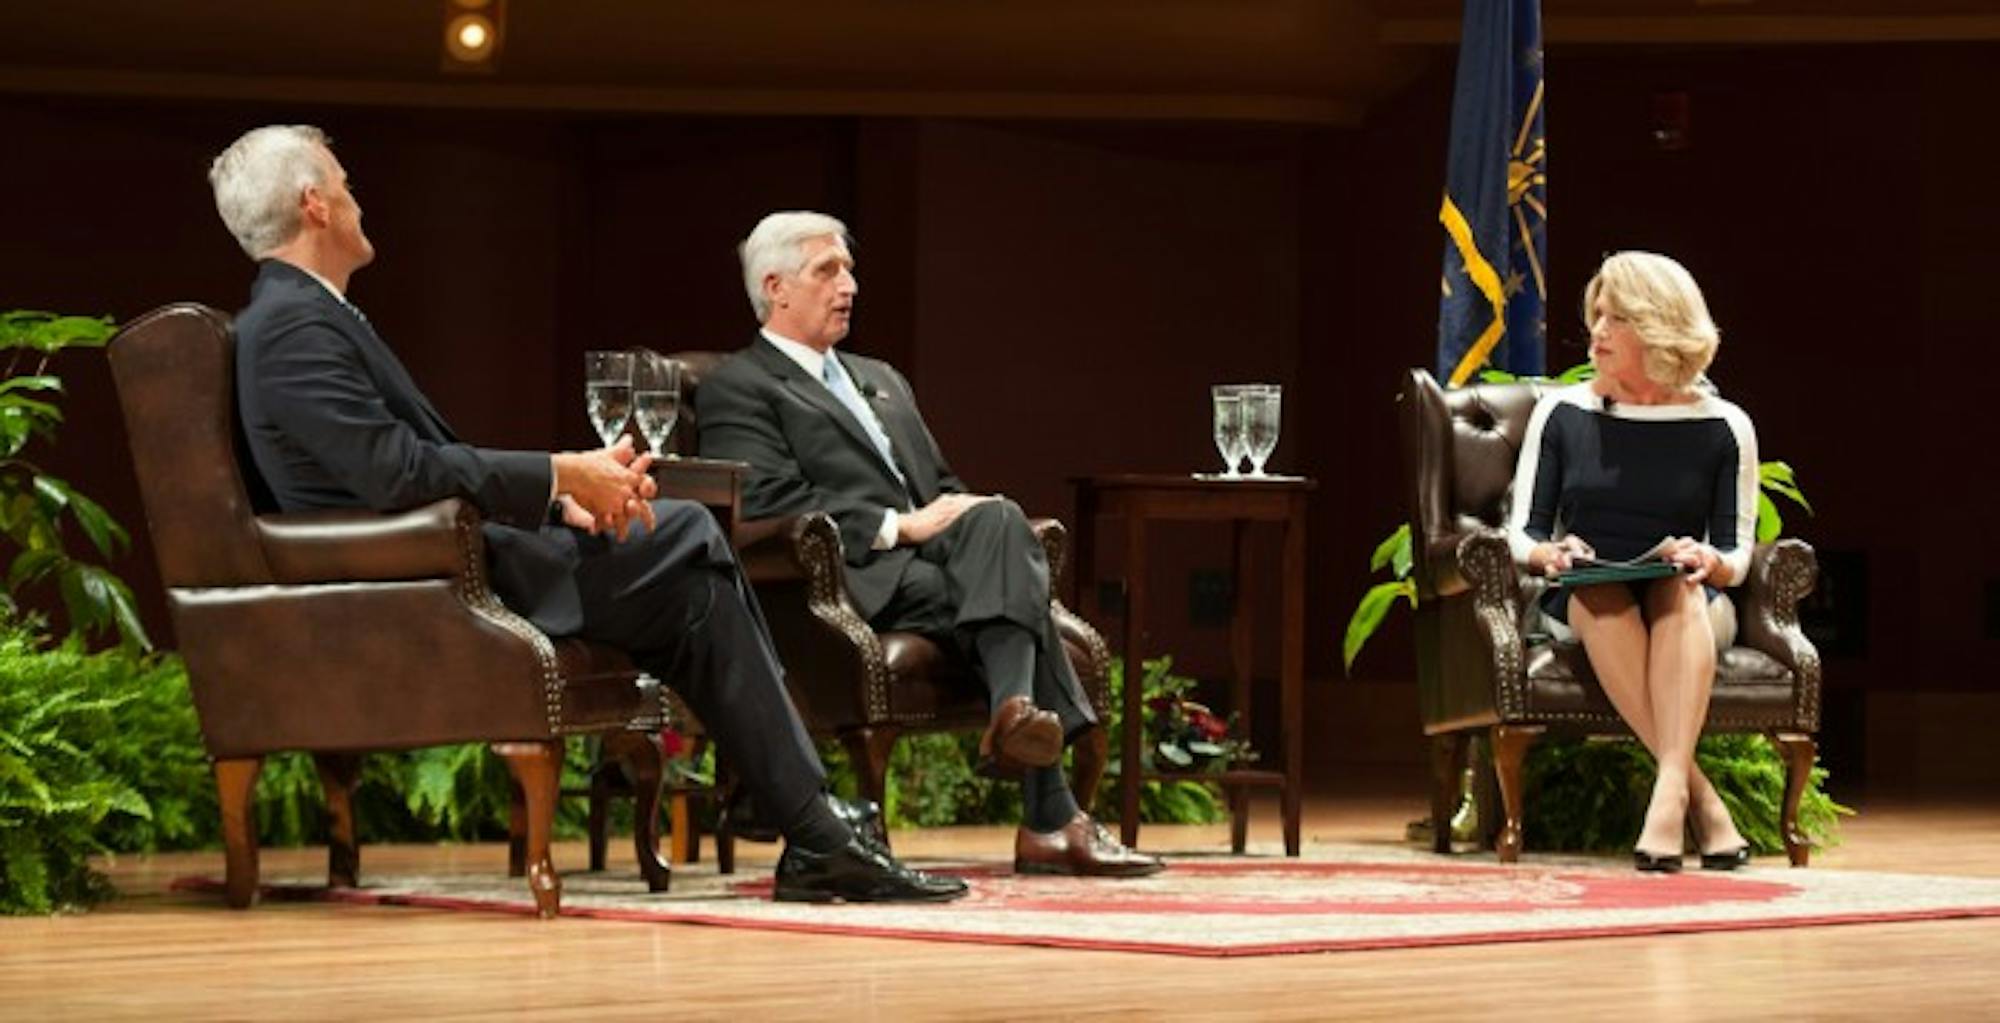 Former White House chiefs of staff Denis McDonough, left, and Andrew Card, right, speak at a lecture Wednesday night in DeBartolo Performing Arts Center. The two discussed presidential decision making and American foreign policy.